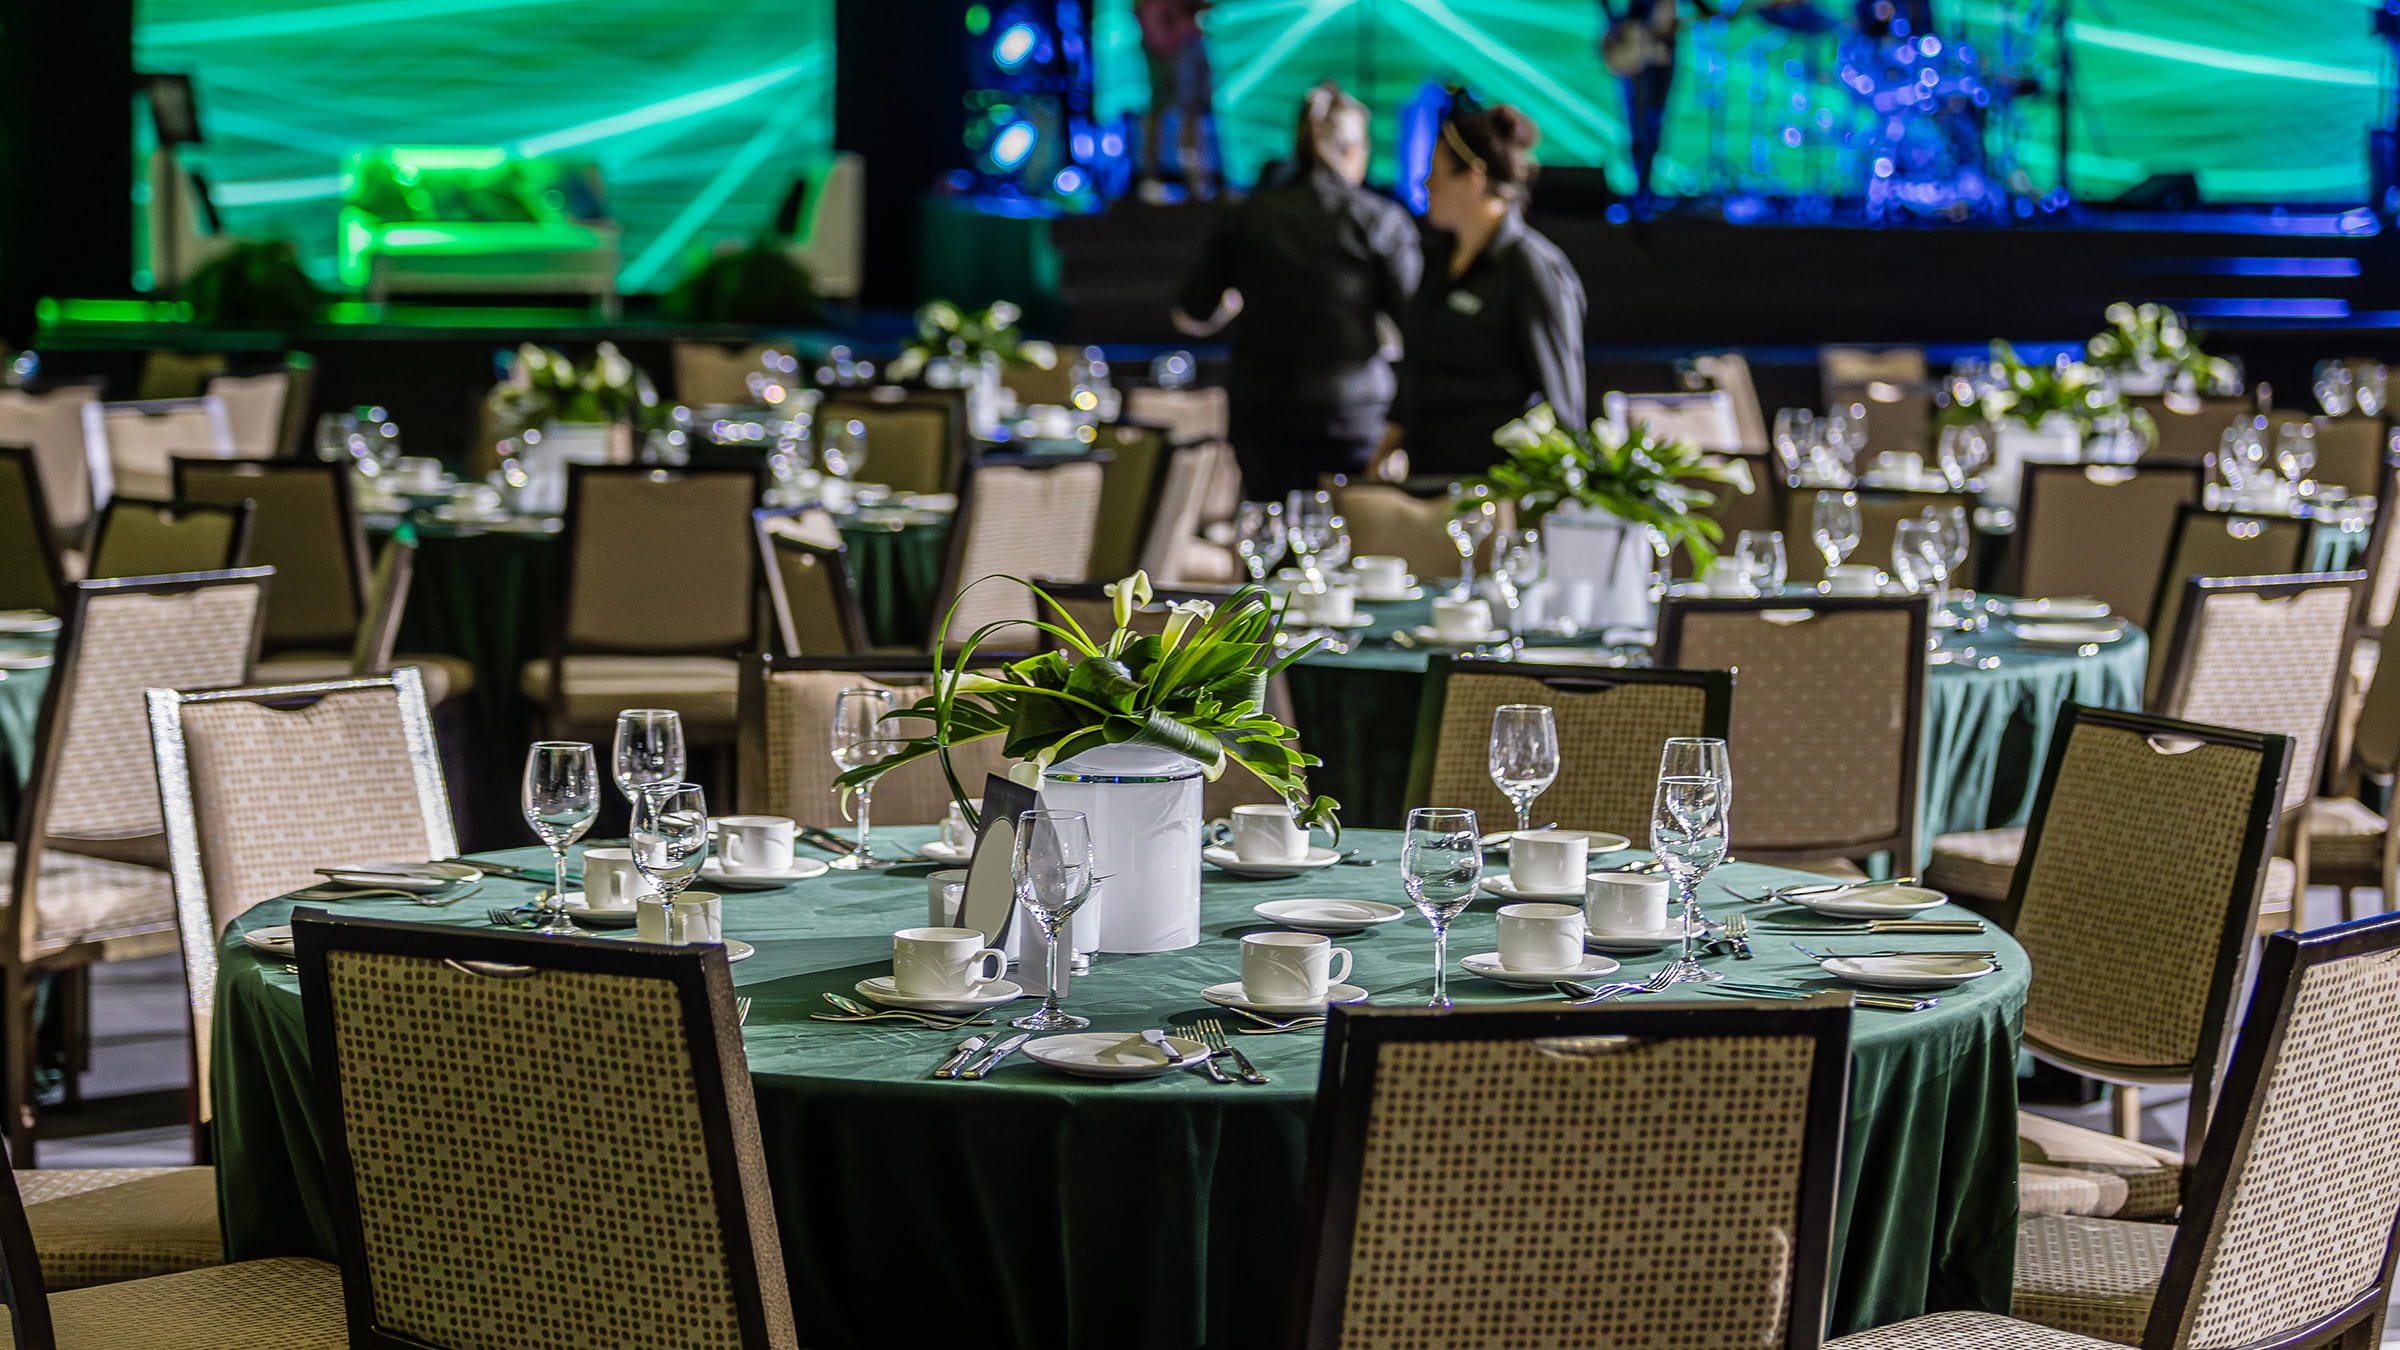 A banquet hall with green tables and chairs.